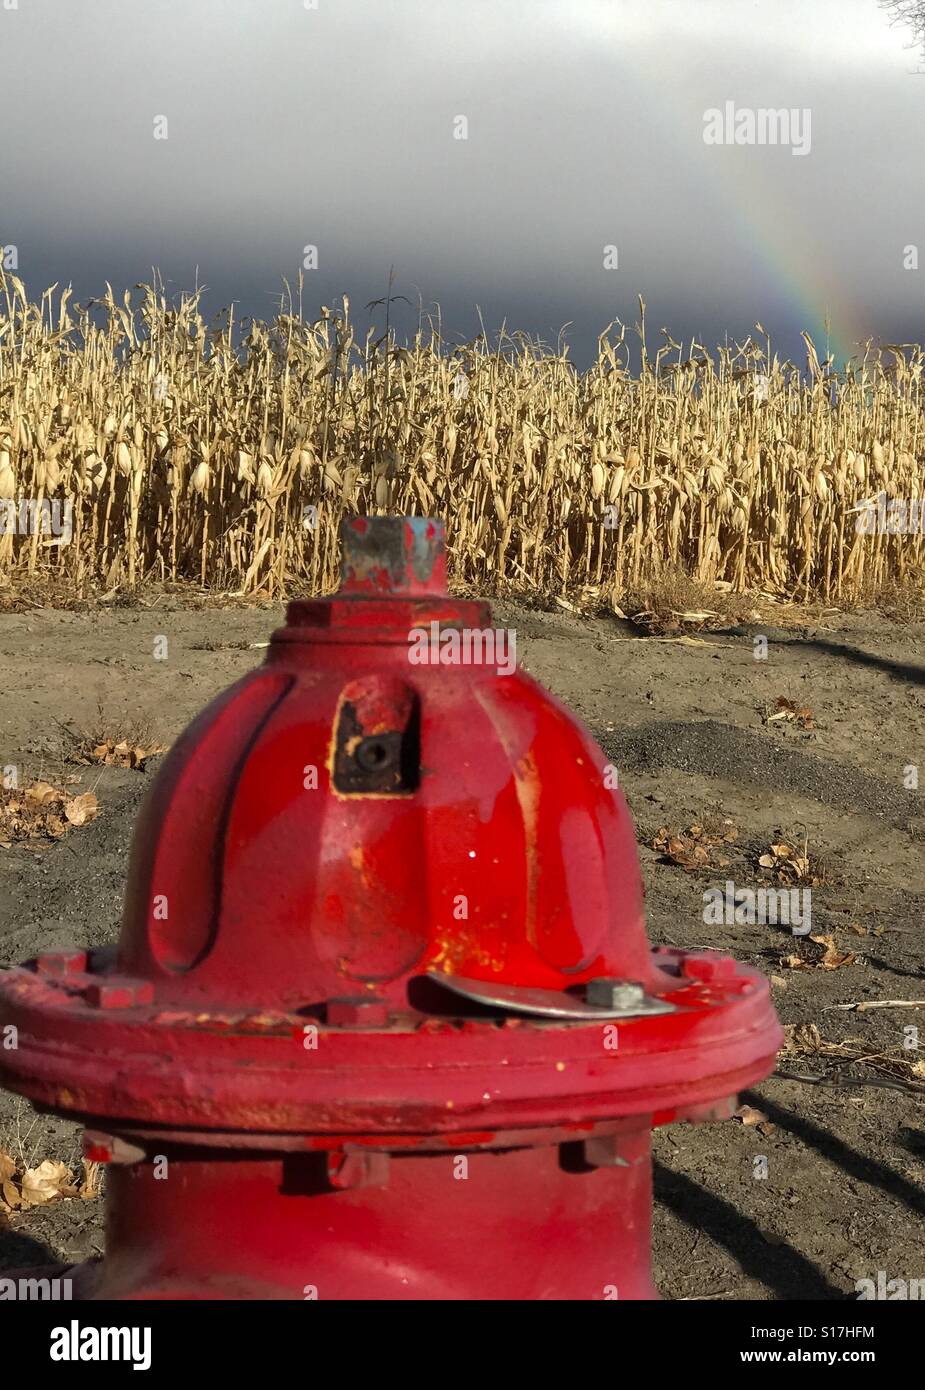 Top of fire hydrant in a rural area near a corn field with a rainbow above in western Colorado Stock Photo